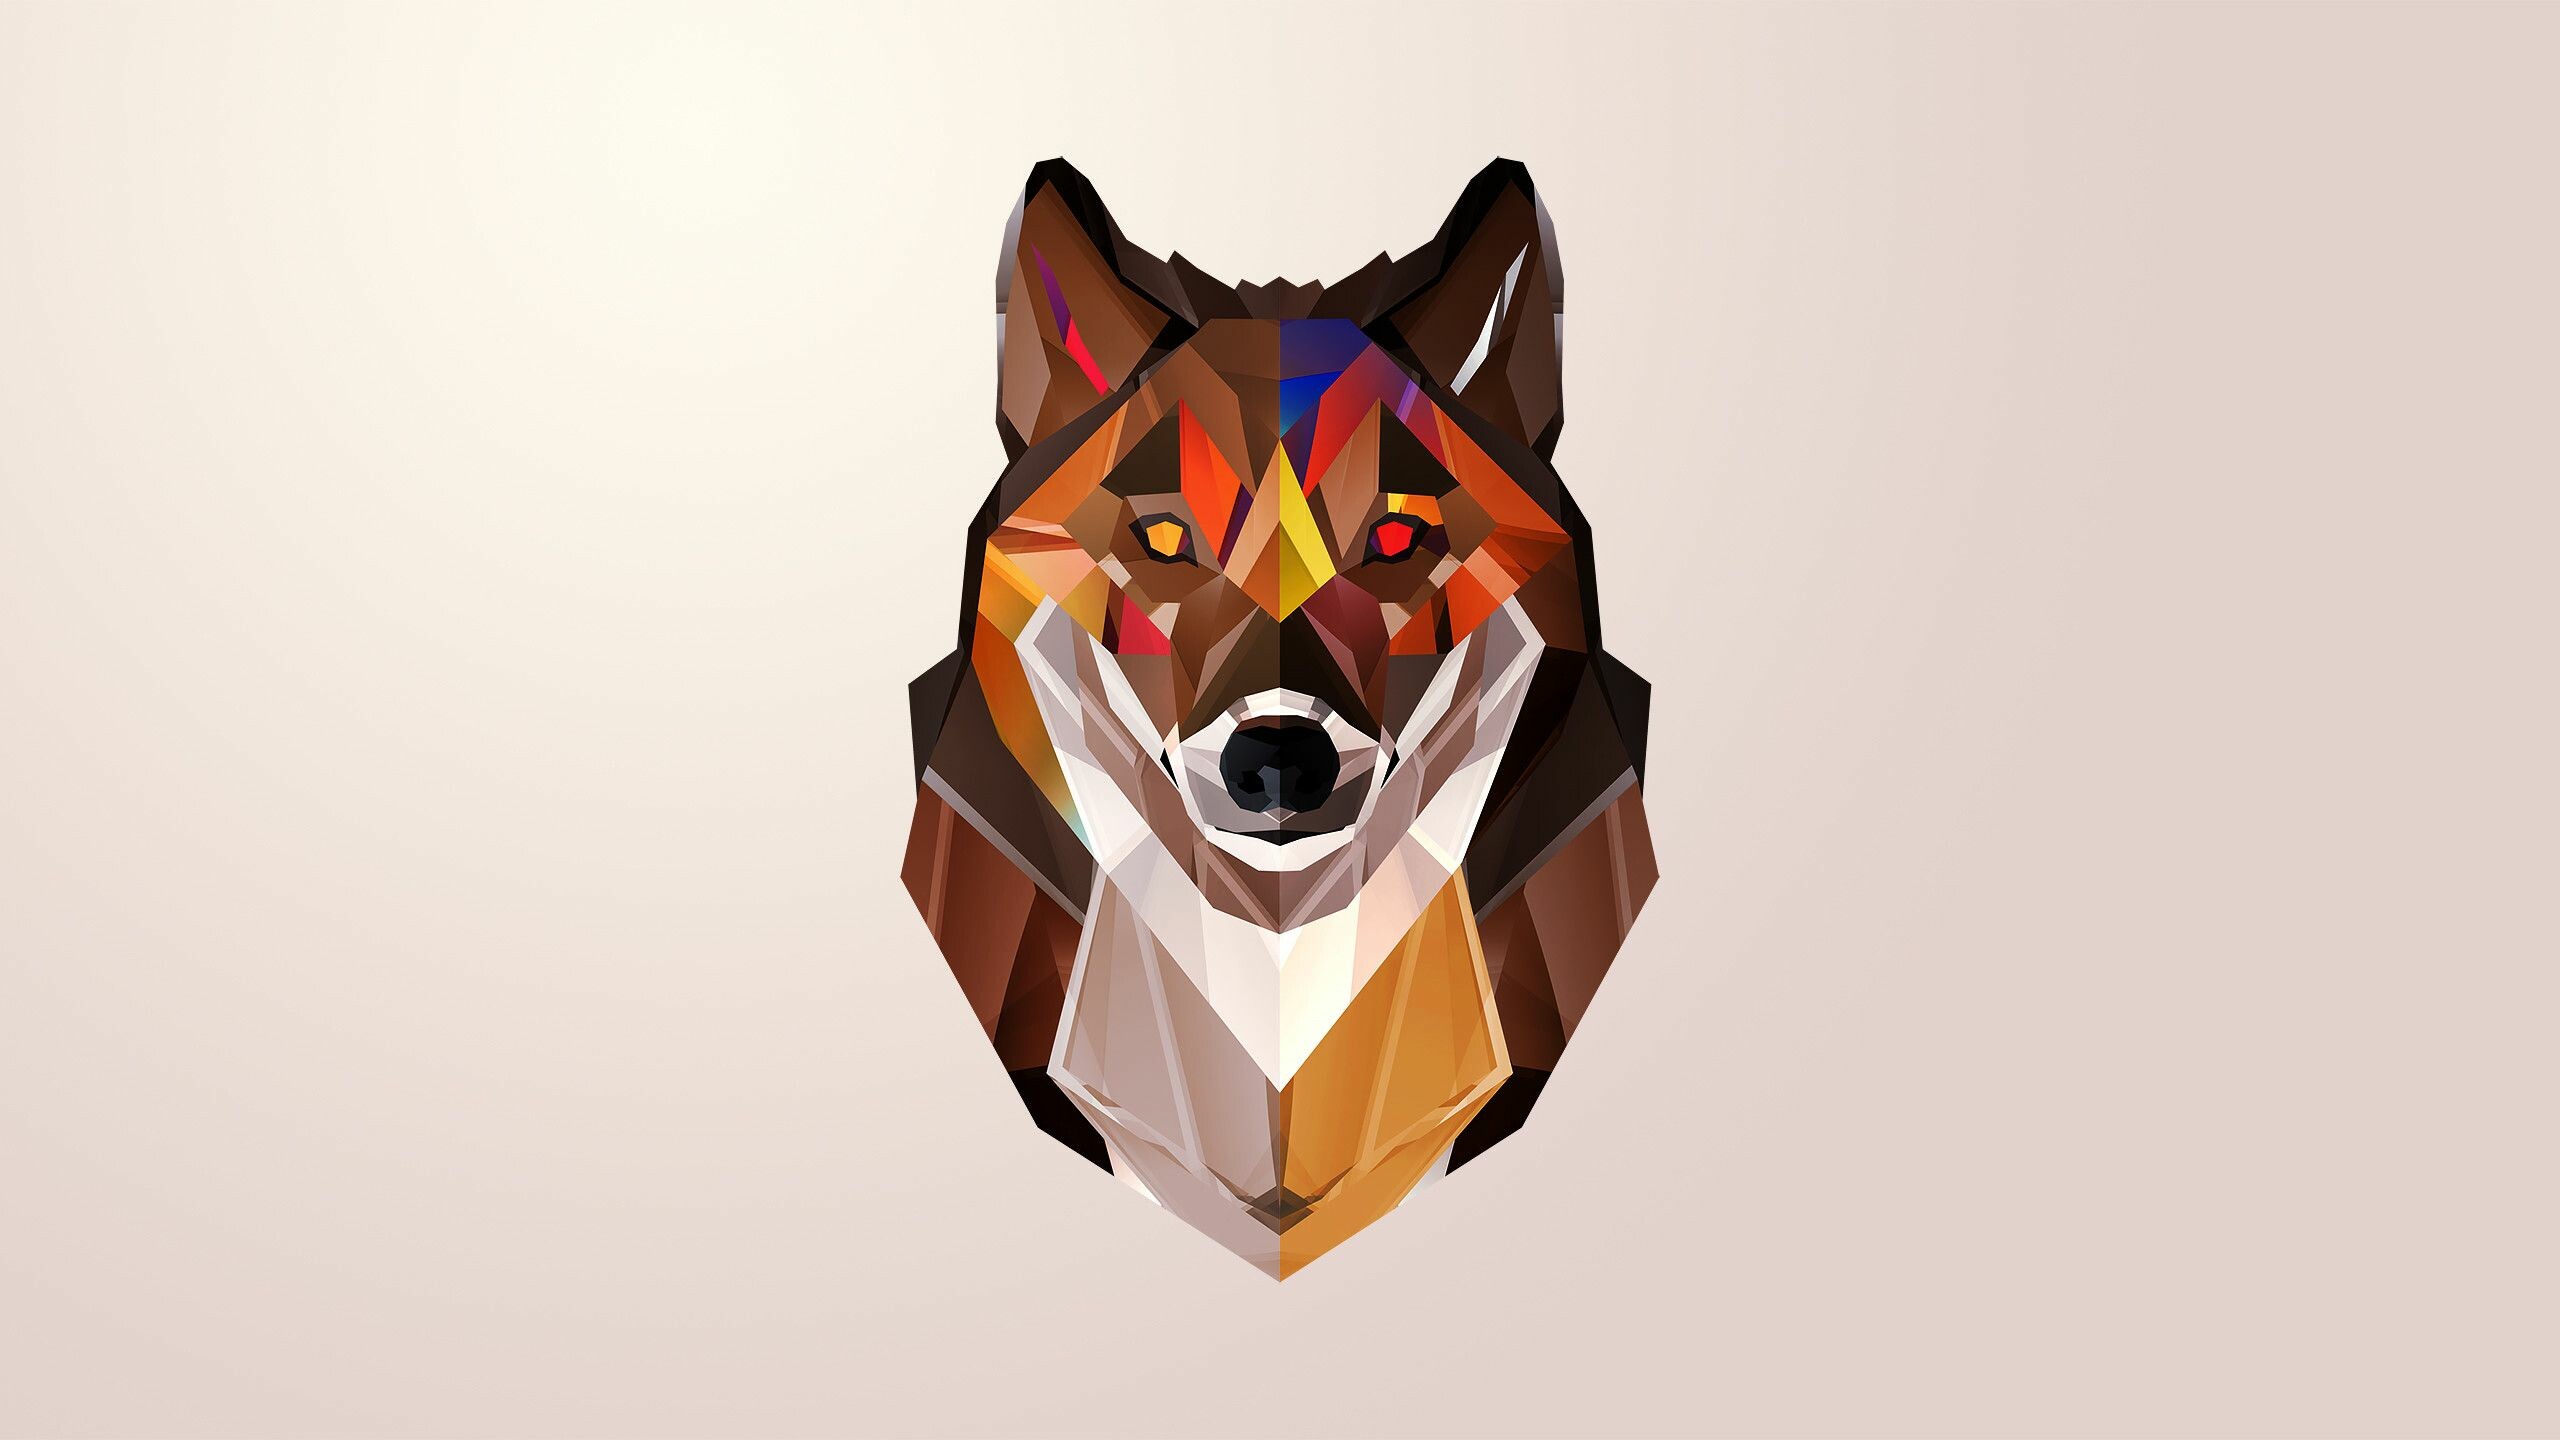 Abstract Wolf Wallpaper: HD, 4K, 5K for PC and Mobile. Download free image for iPhone, Android